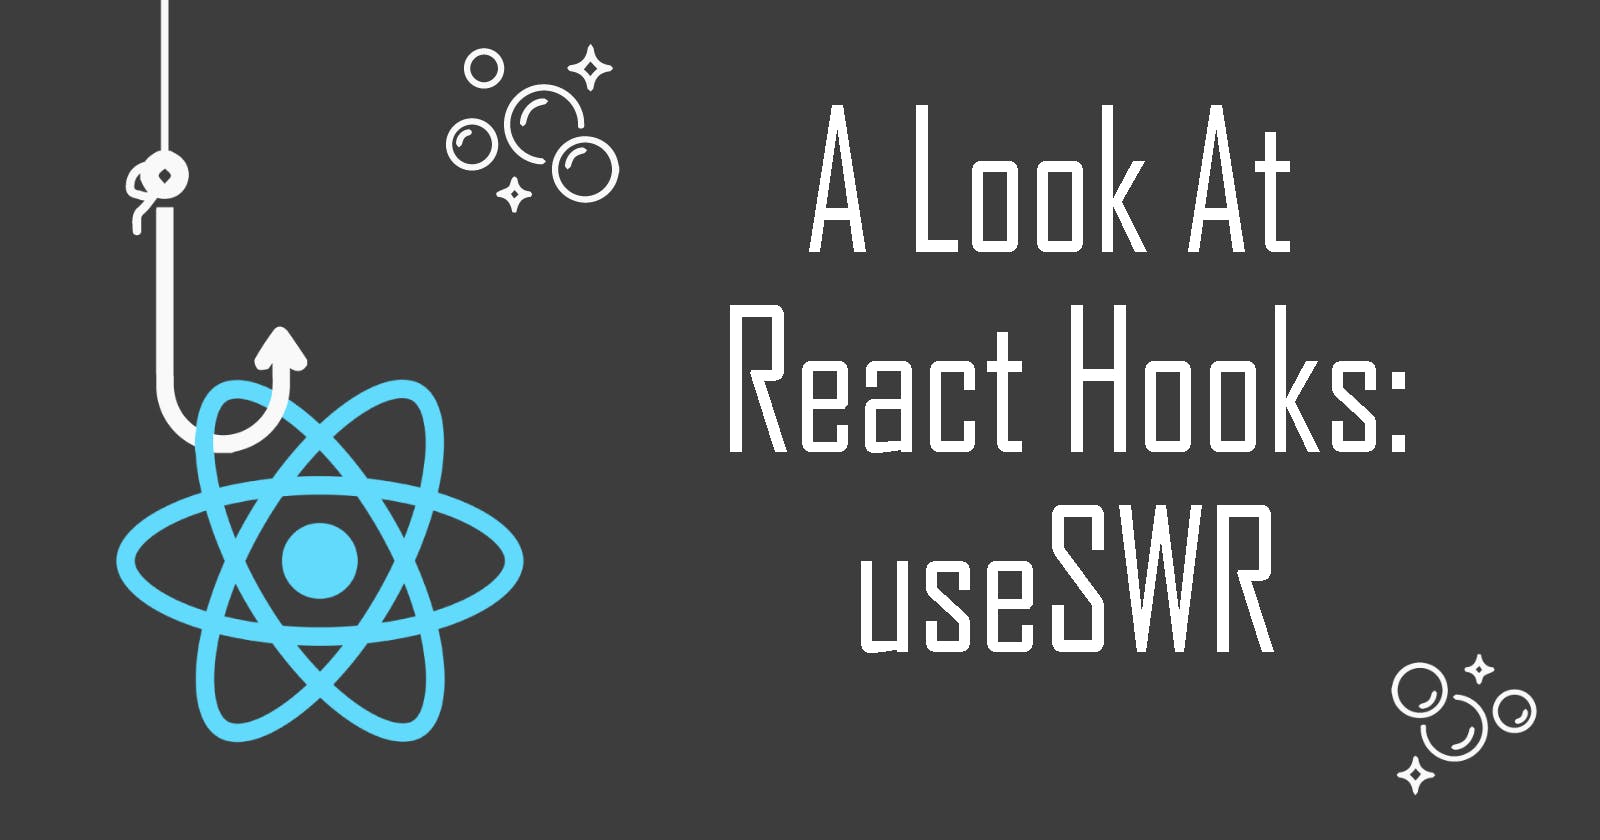 A Look At React Hooks: useSWR for Data Fetching in React